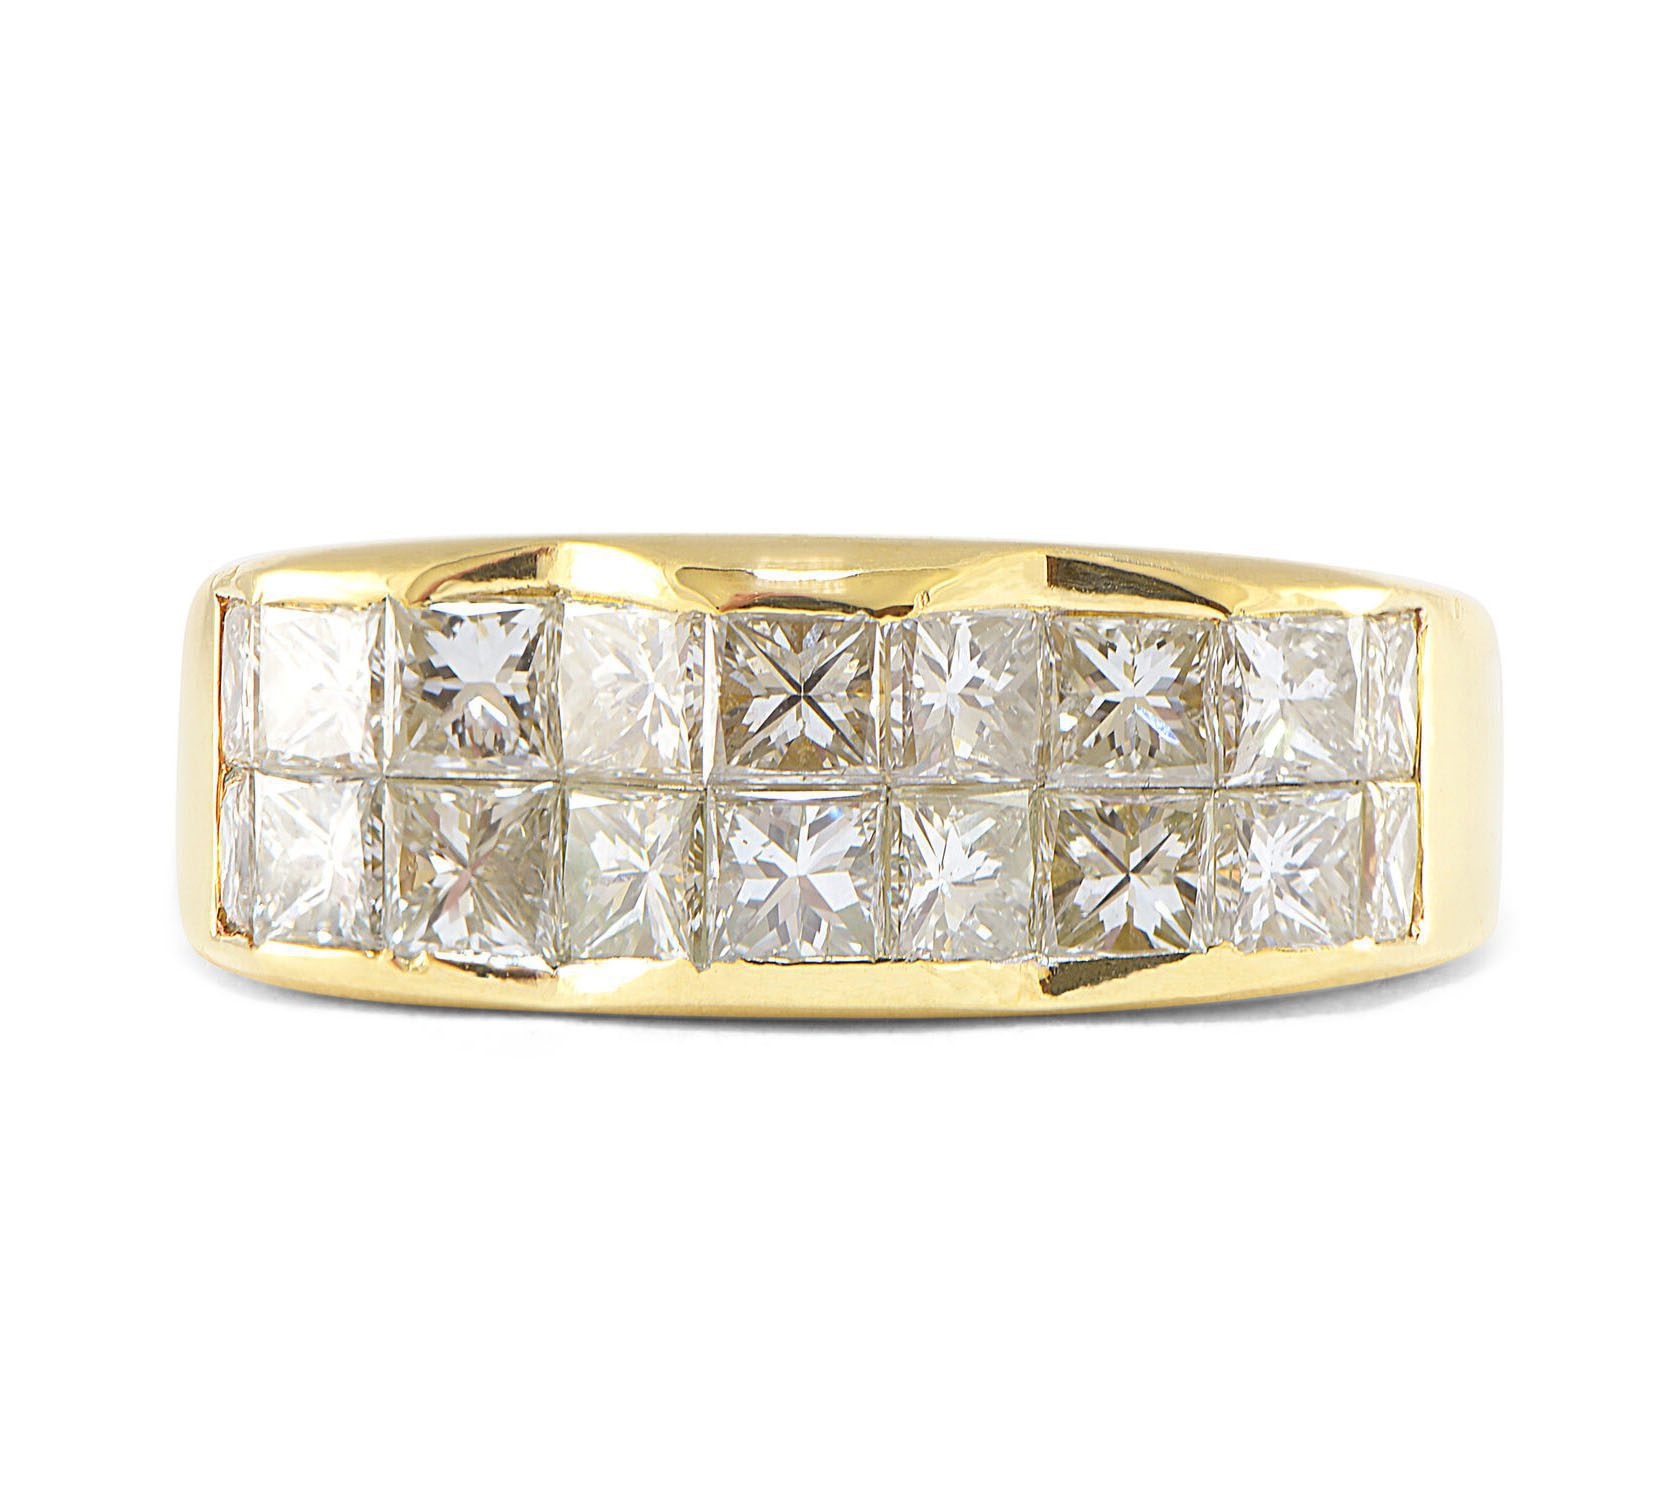 27ct-TW-Princess-Wave-Ring-Double-Channel-Setting-18k-Yellow-Gold-HVS-Size-55-112454231971